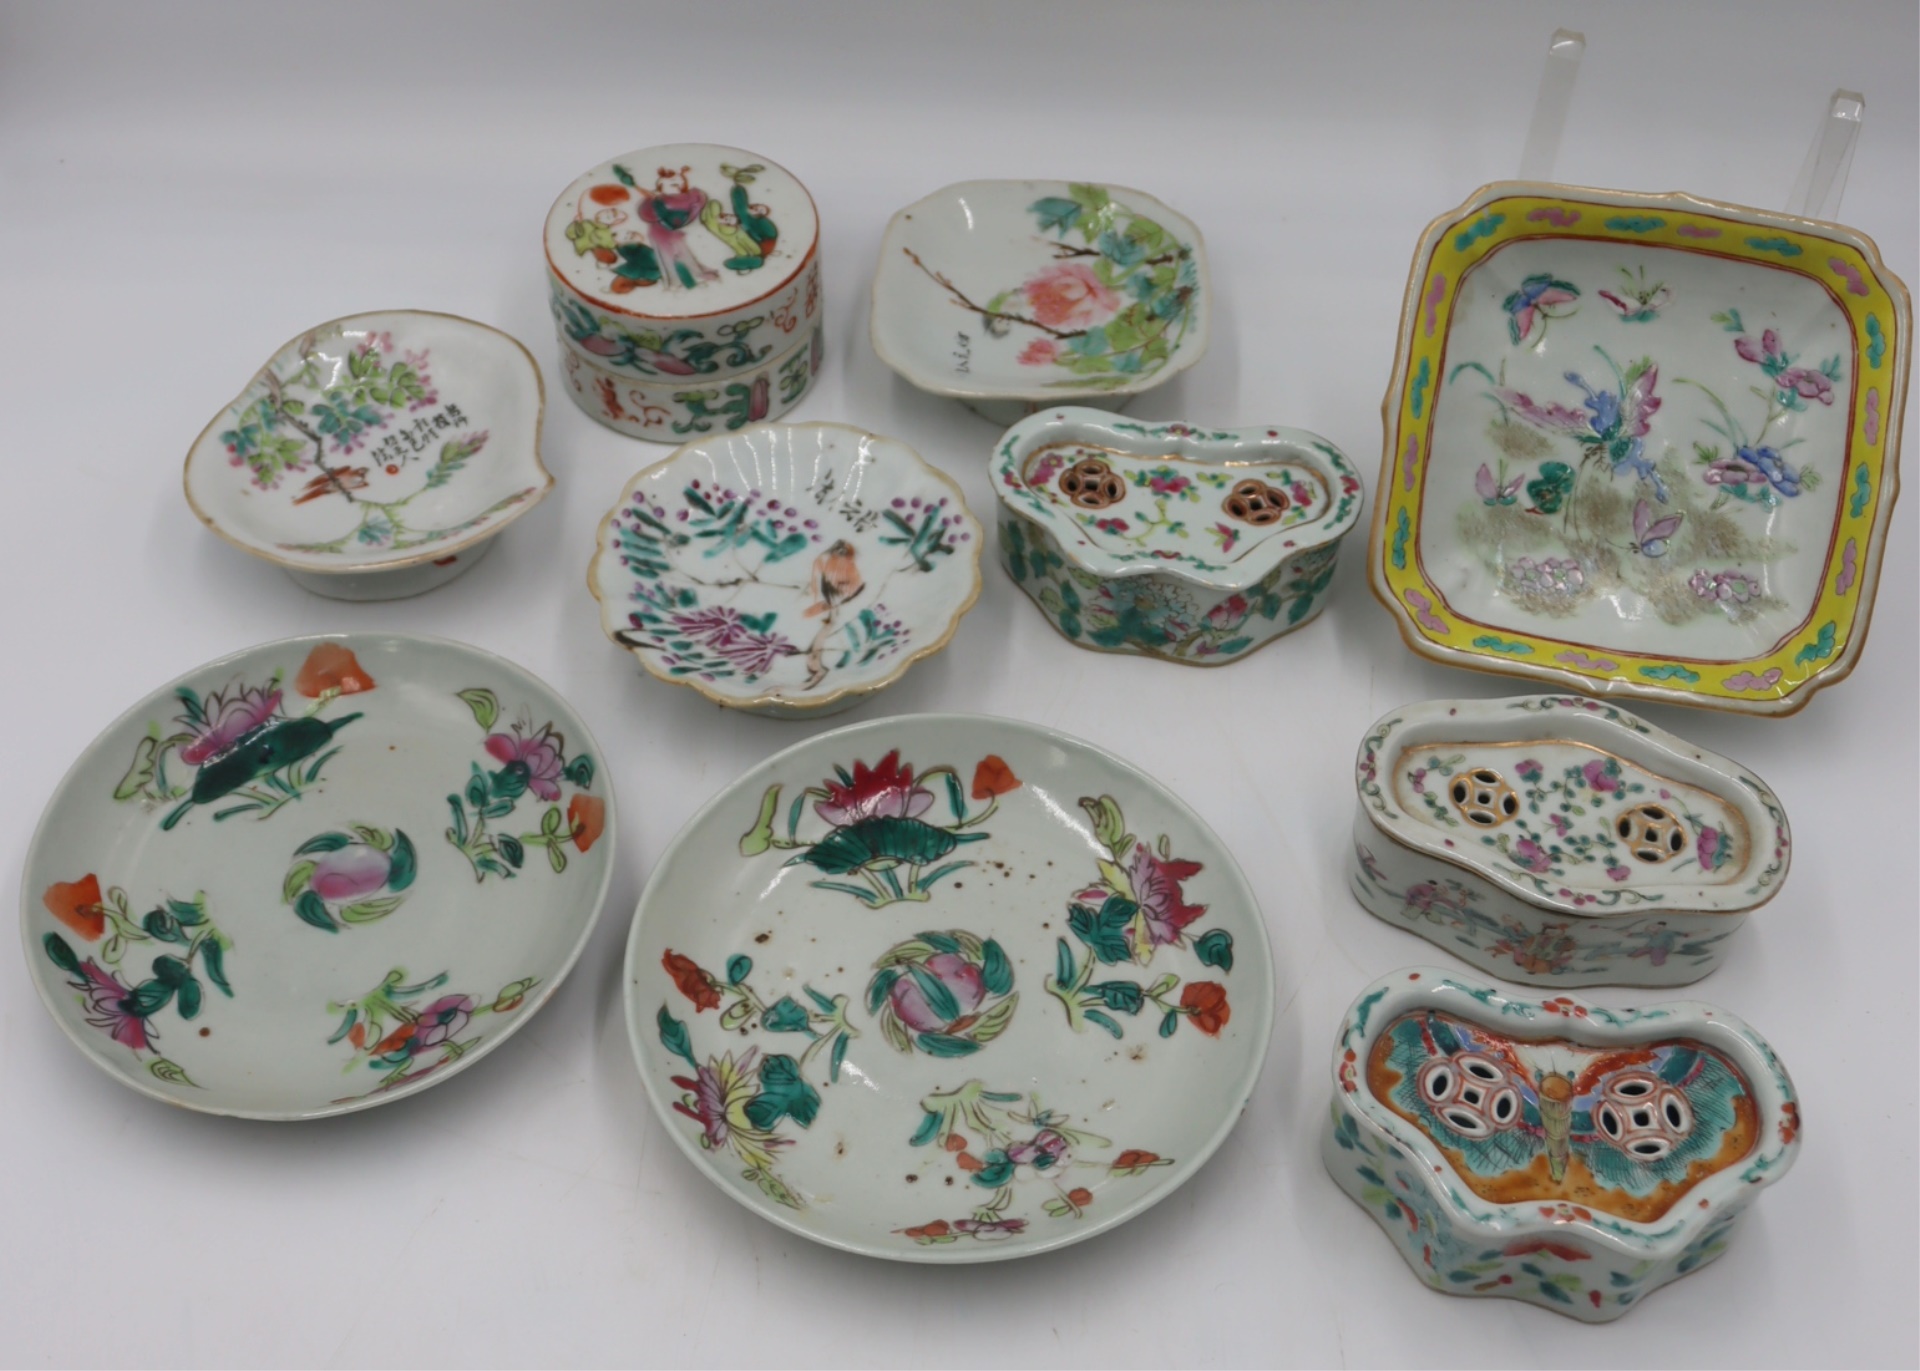 CHINESE FAMILLE ROSE PORCELAIN 3b6f24